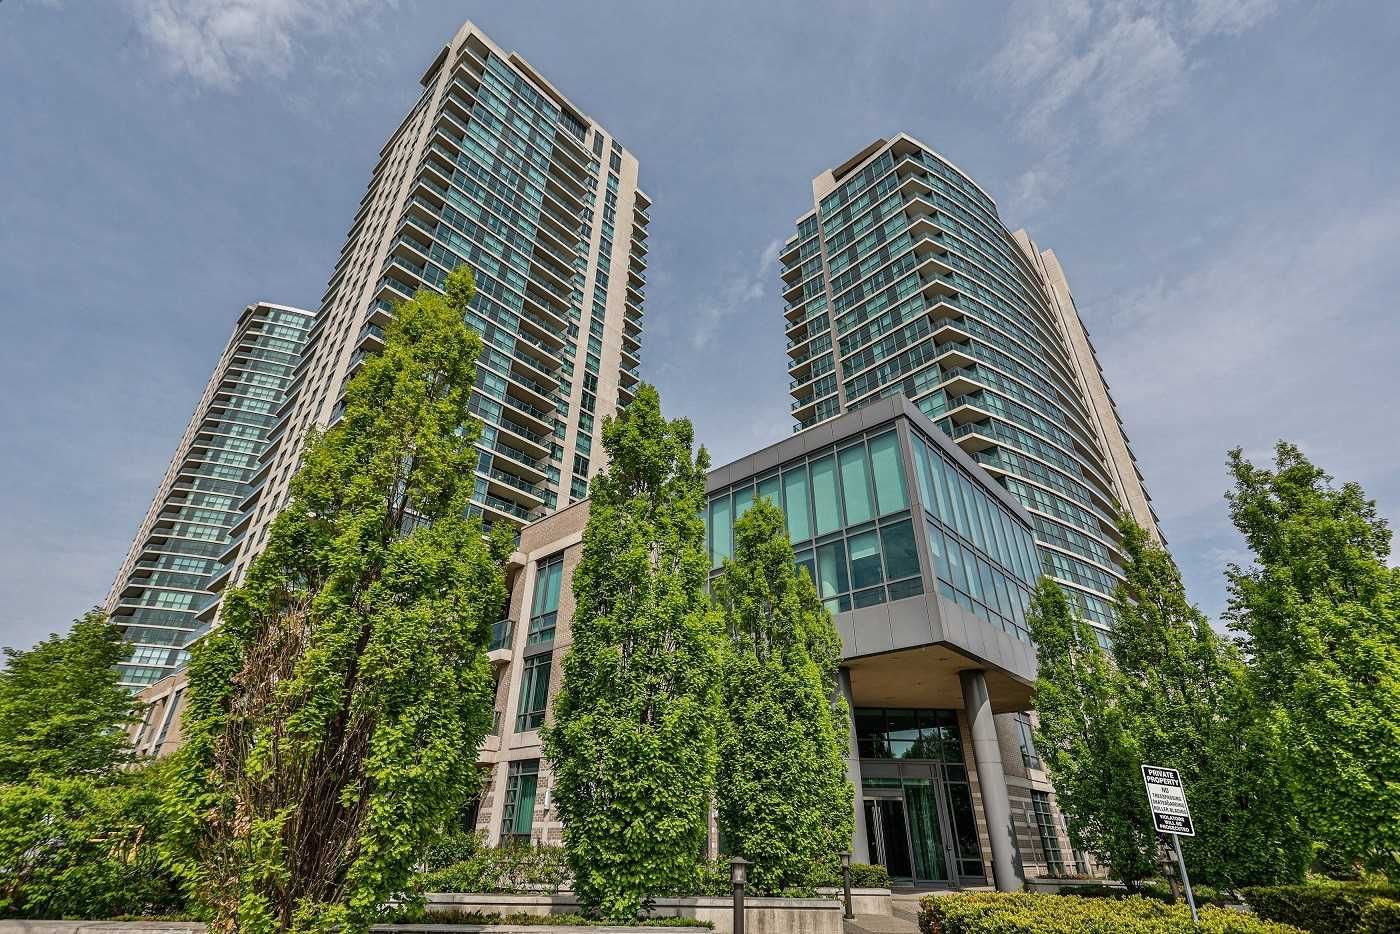 https://media.strata.ca/property-images/1508/01_one_sherway_tower_four_condos-1500.jpg